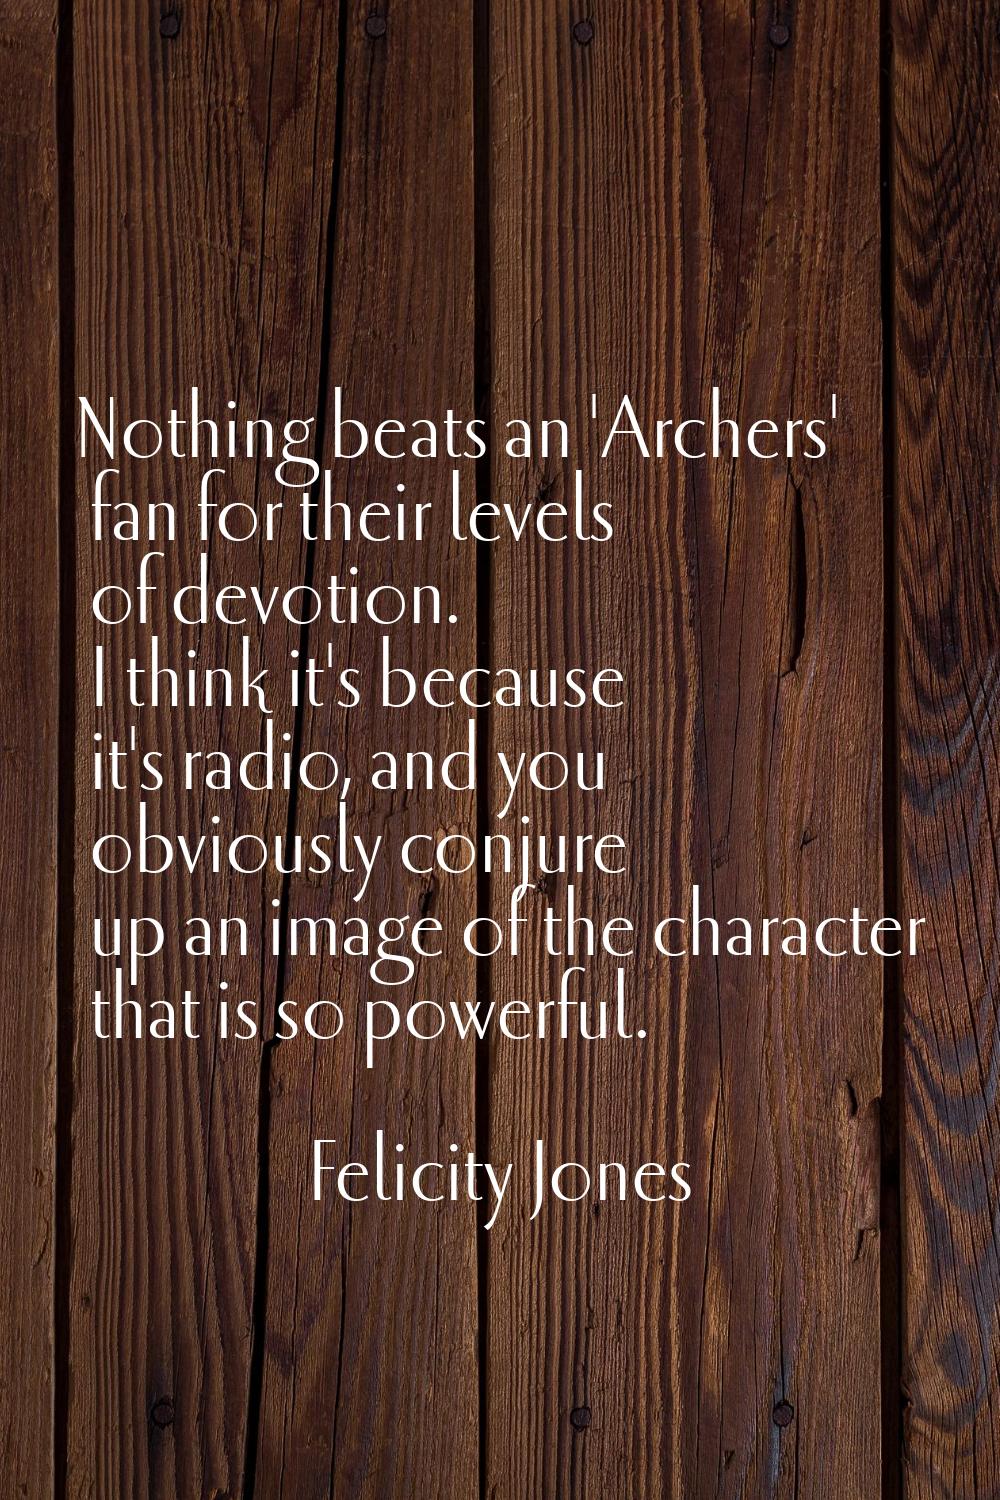 Nothing beats an 'Archers' fan for their levels of devotion. I think it's because it's radio, and y